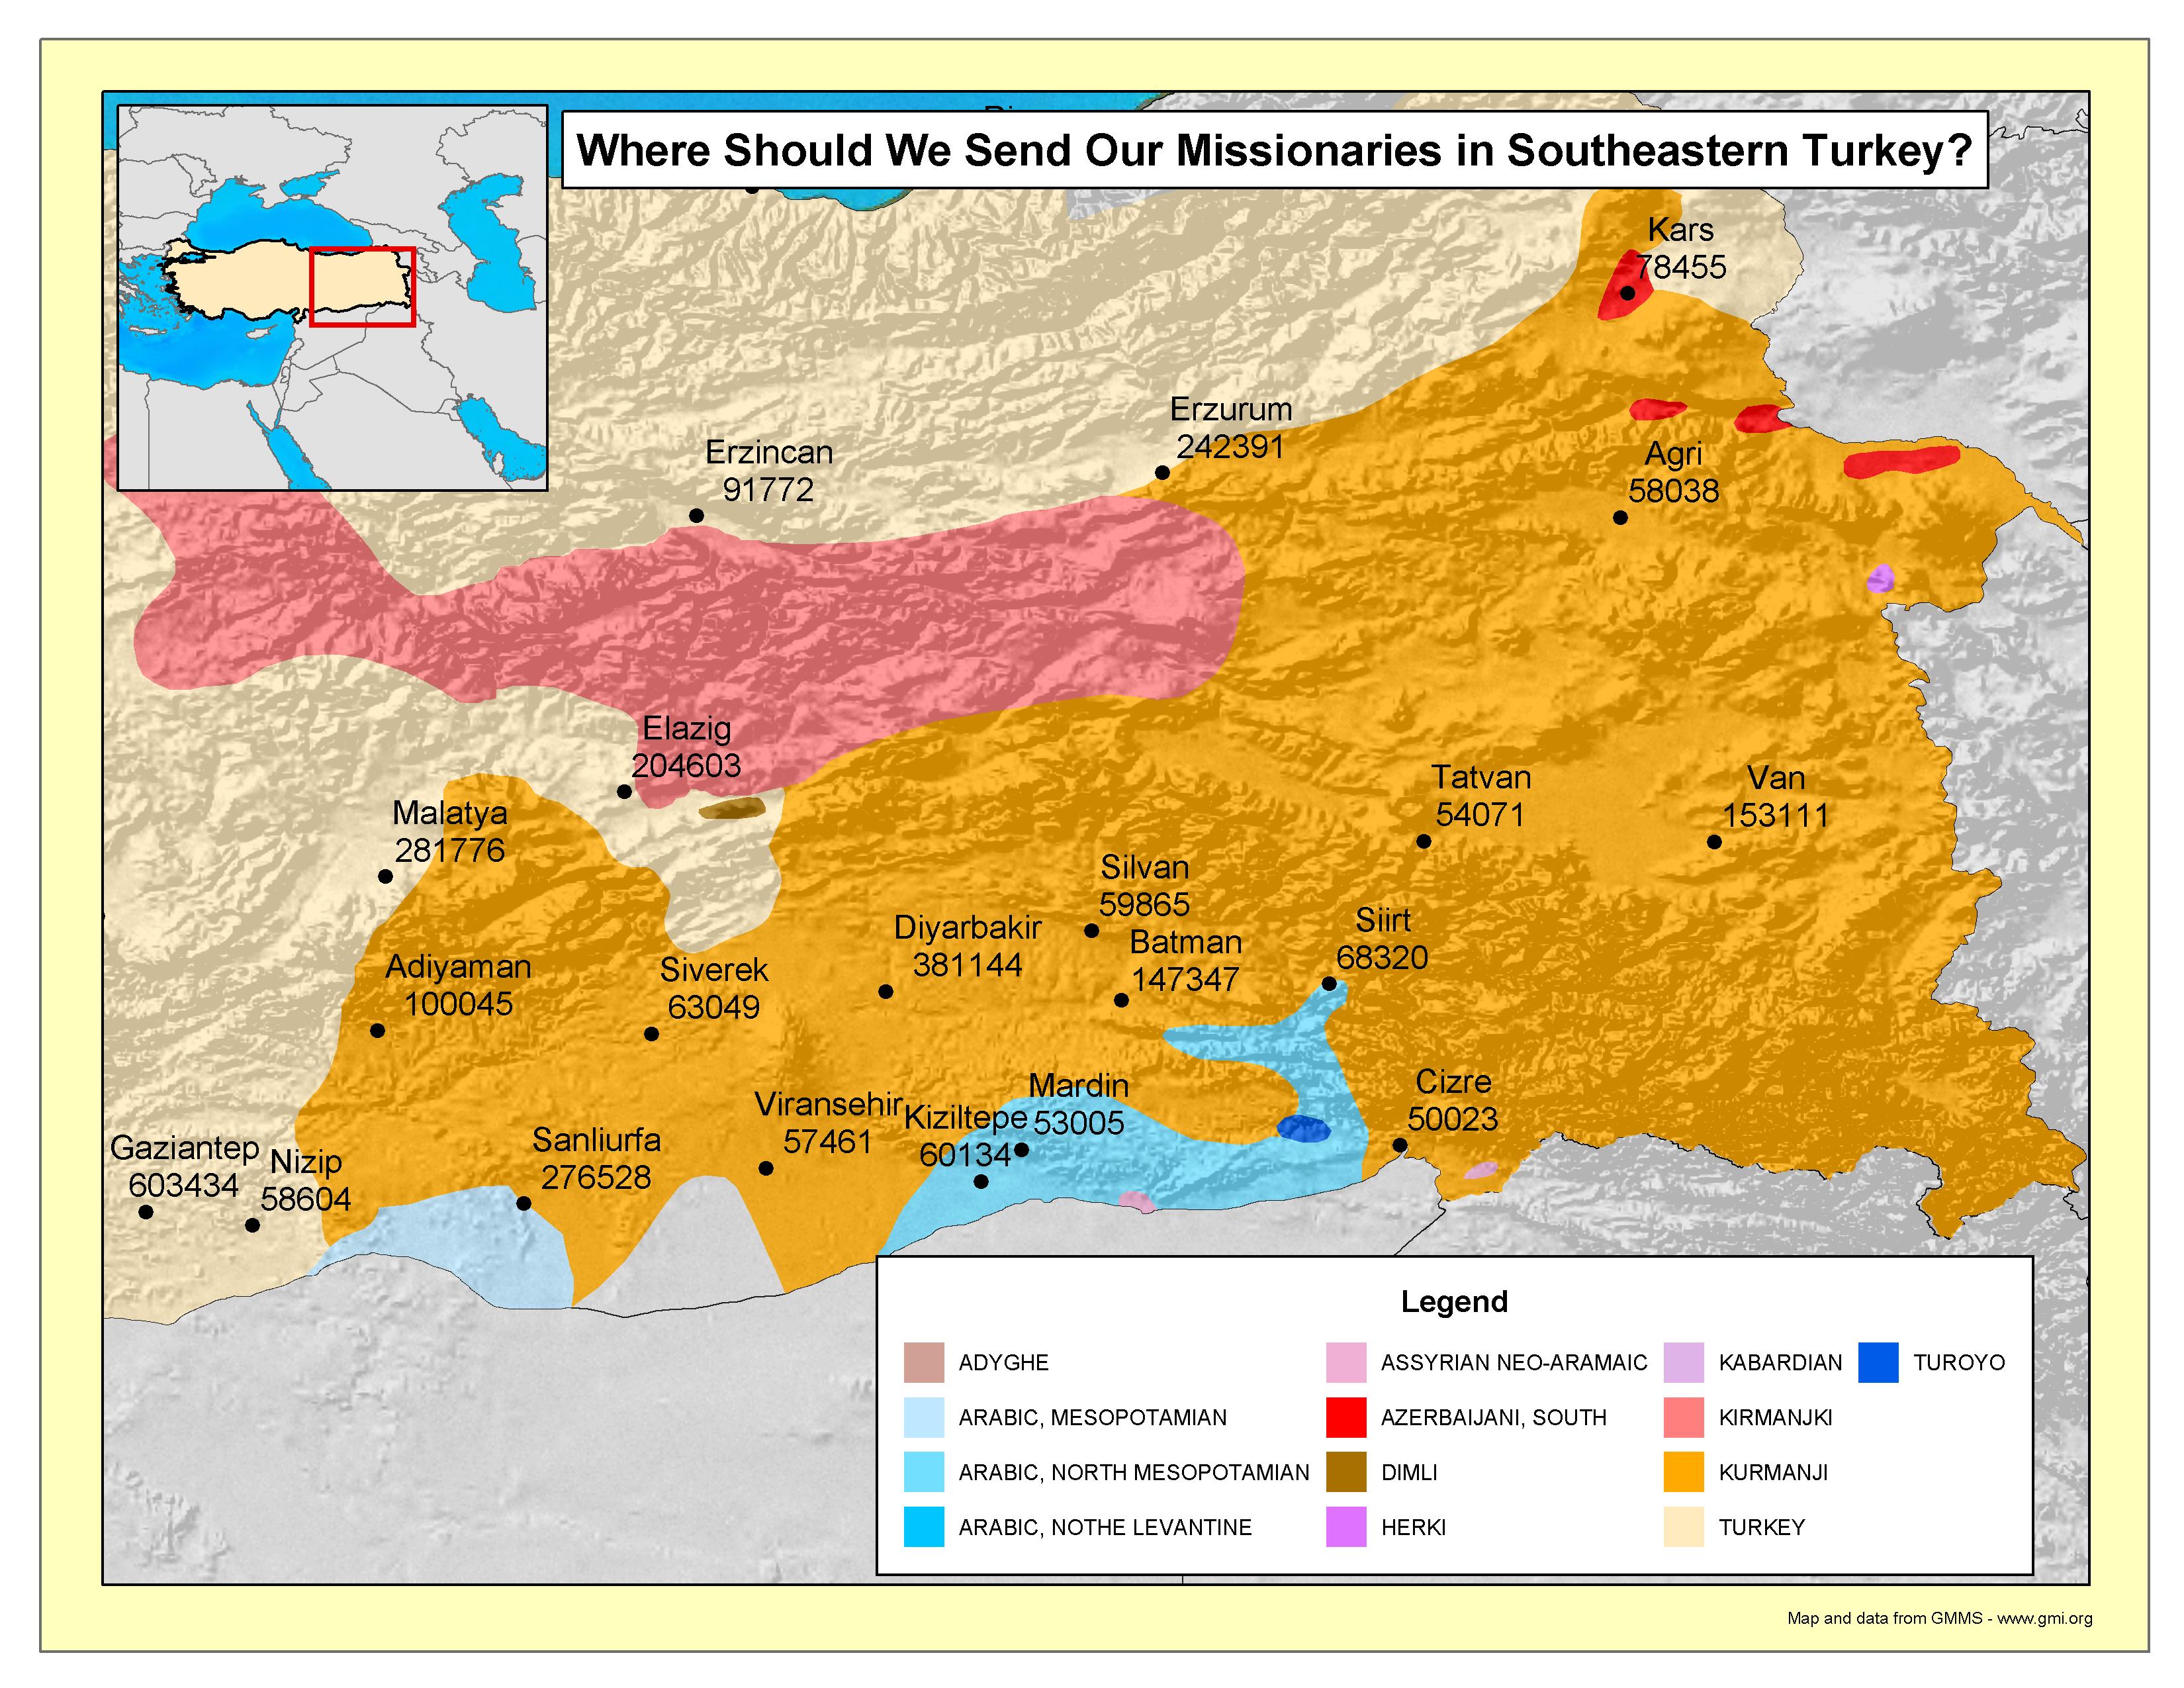 Where should we send our missionaries in Southeastern Turkey?